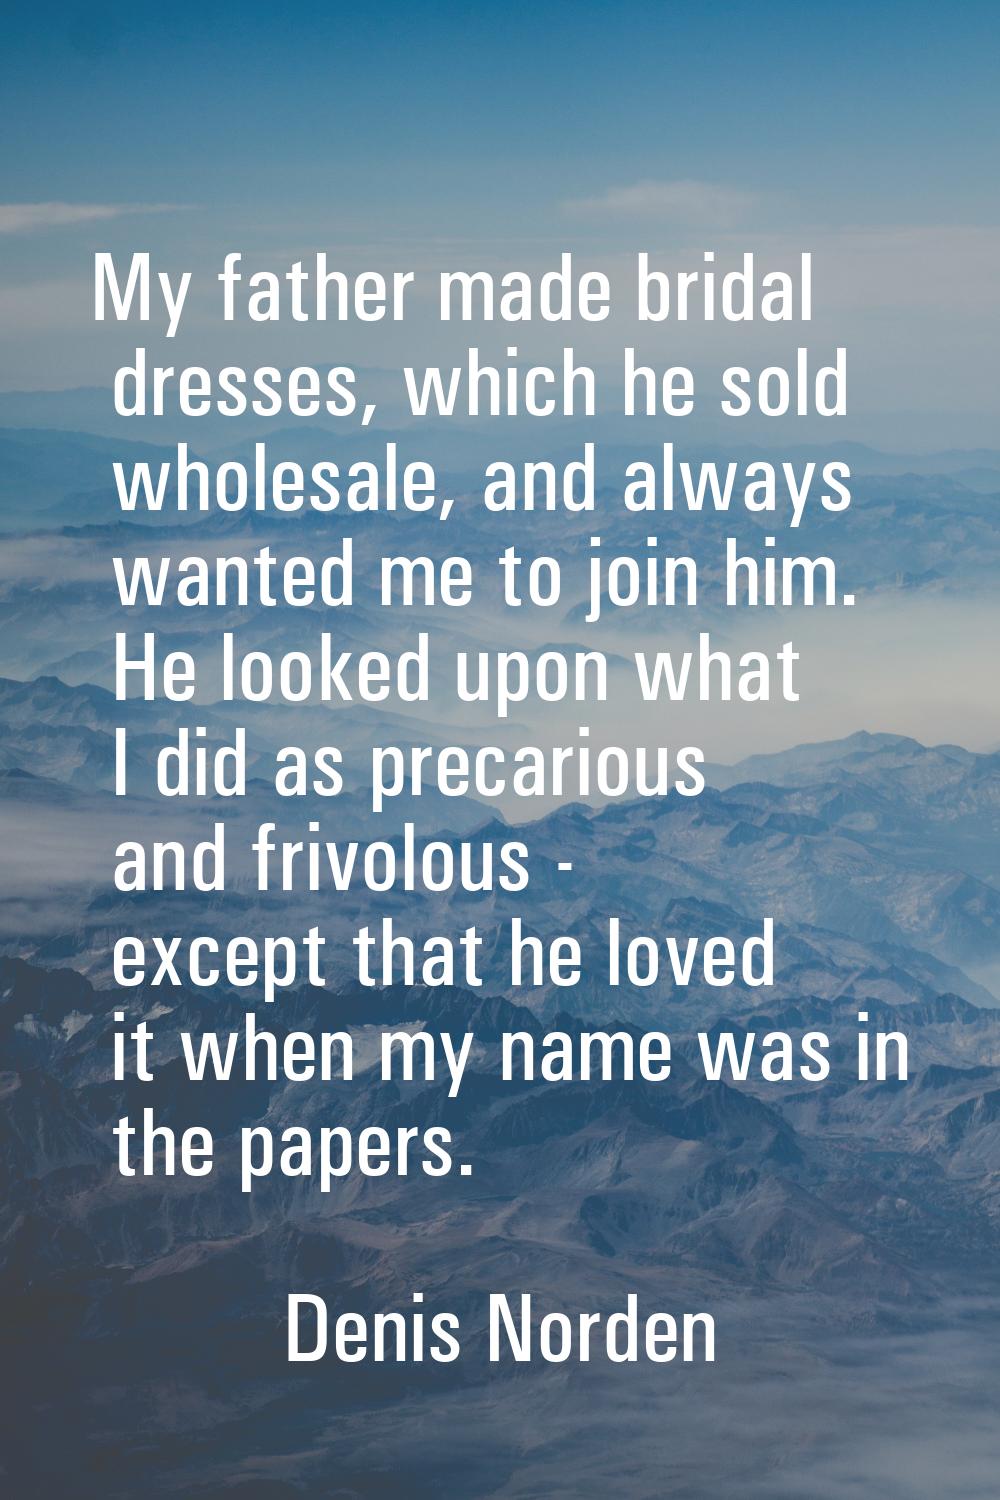 My father made bridal dresses, which he sold wholesale, and always wanted me to join him. He looked